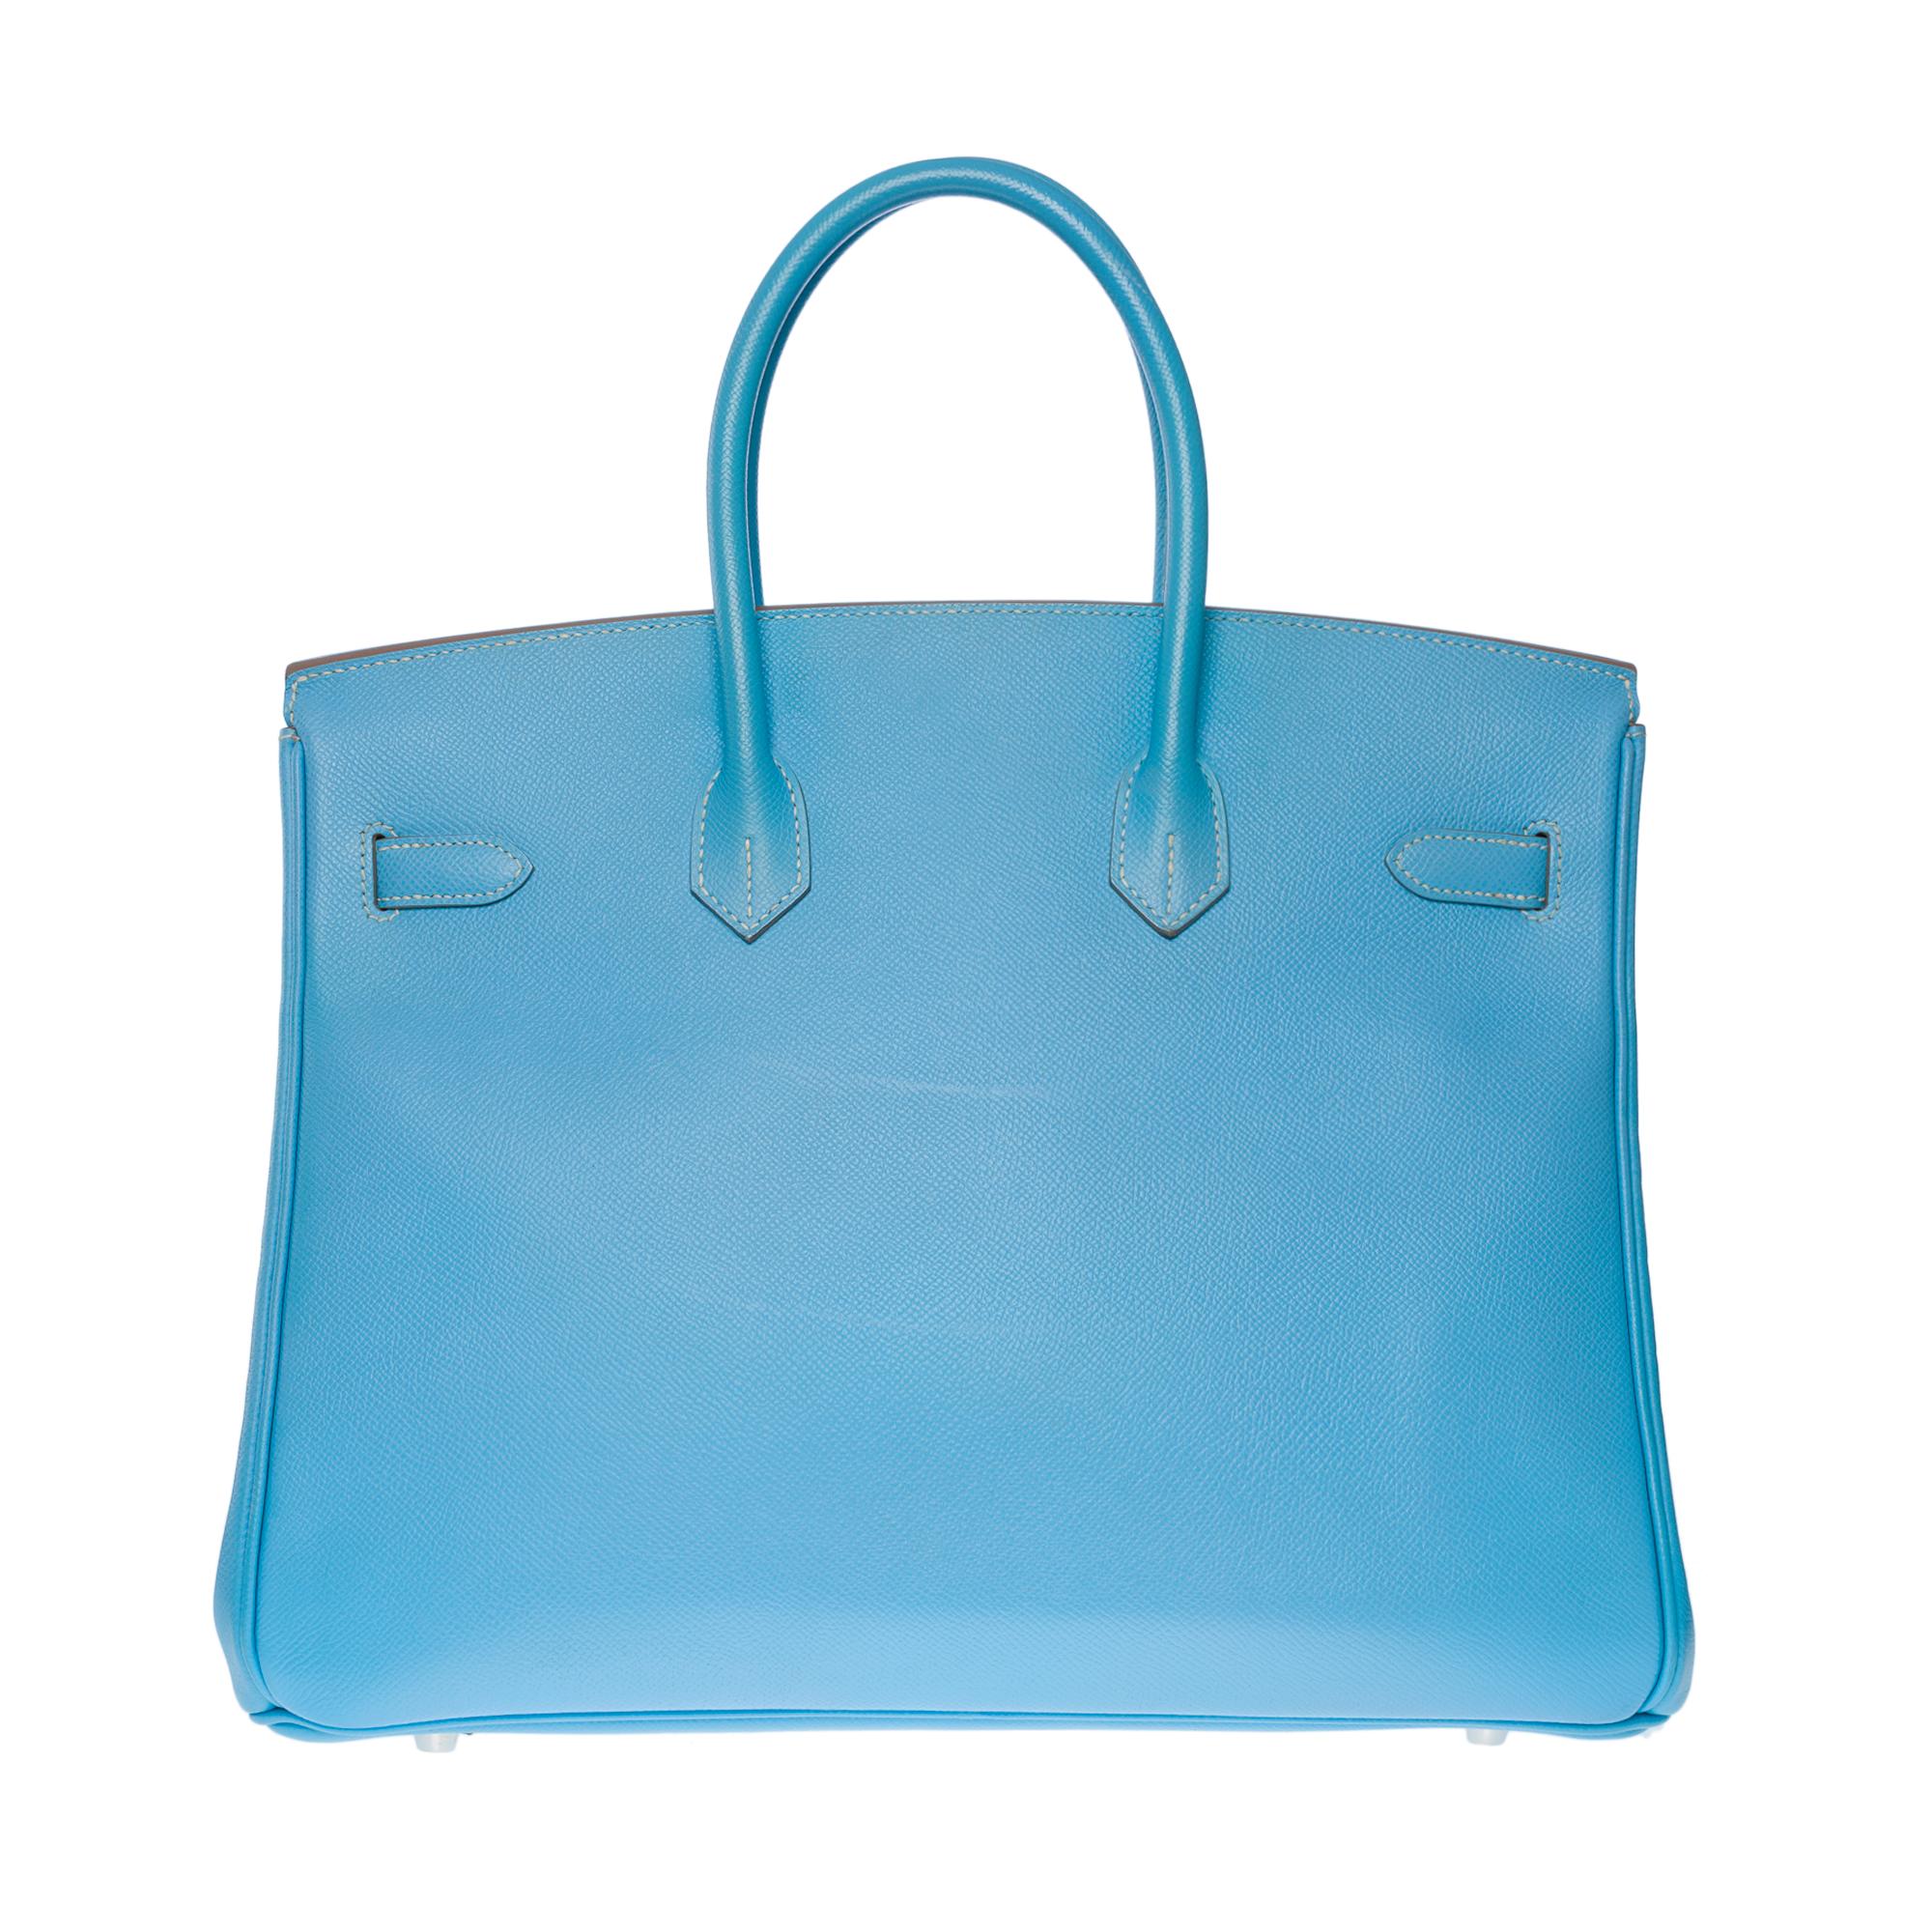 Exceptional & Rare Hermes Birkin 35 Candy limited edition handbag in Blue Celeste epsom leather with Mykonos blue leather Interior, palladium silver metal hardware, double blue leather handle for handmade
Flap closure
mykonos blue leather lining,